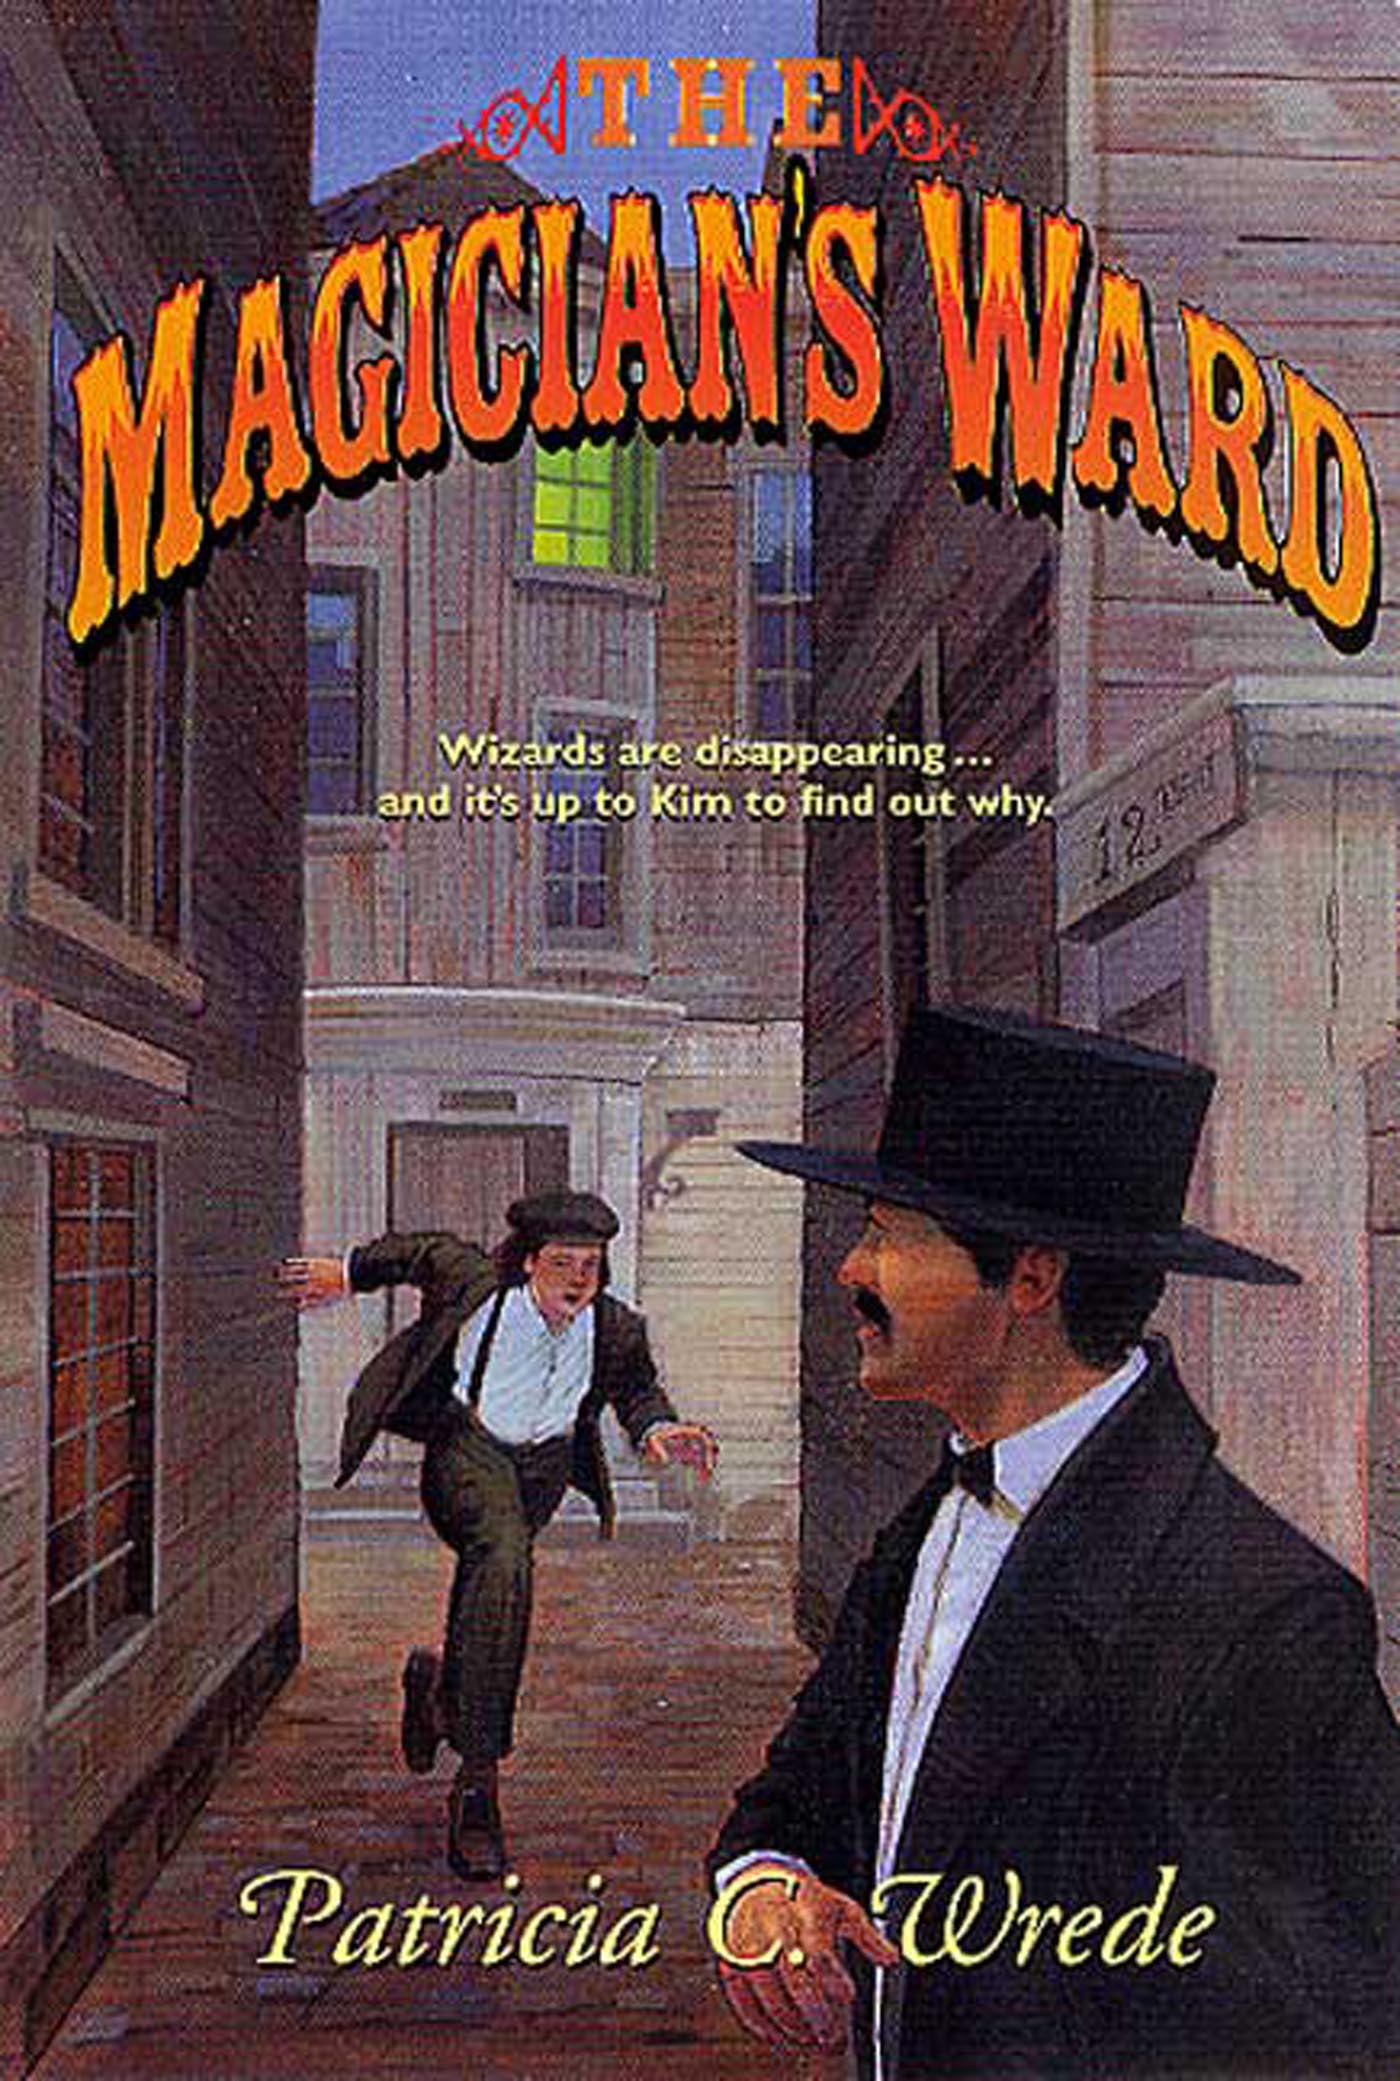 The Magician's Ward by Patricia C. Wrede